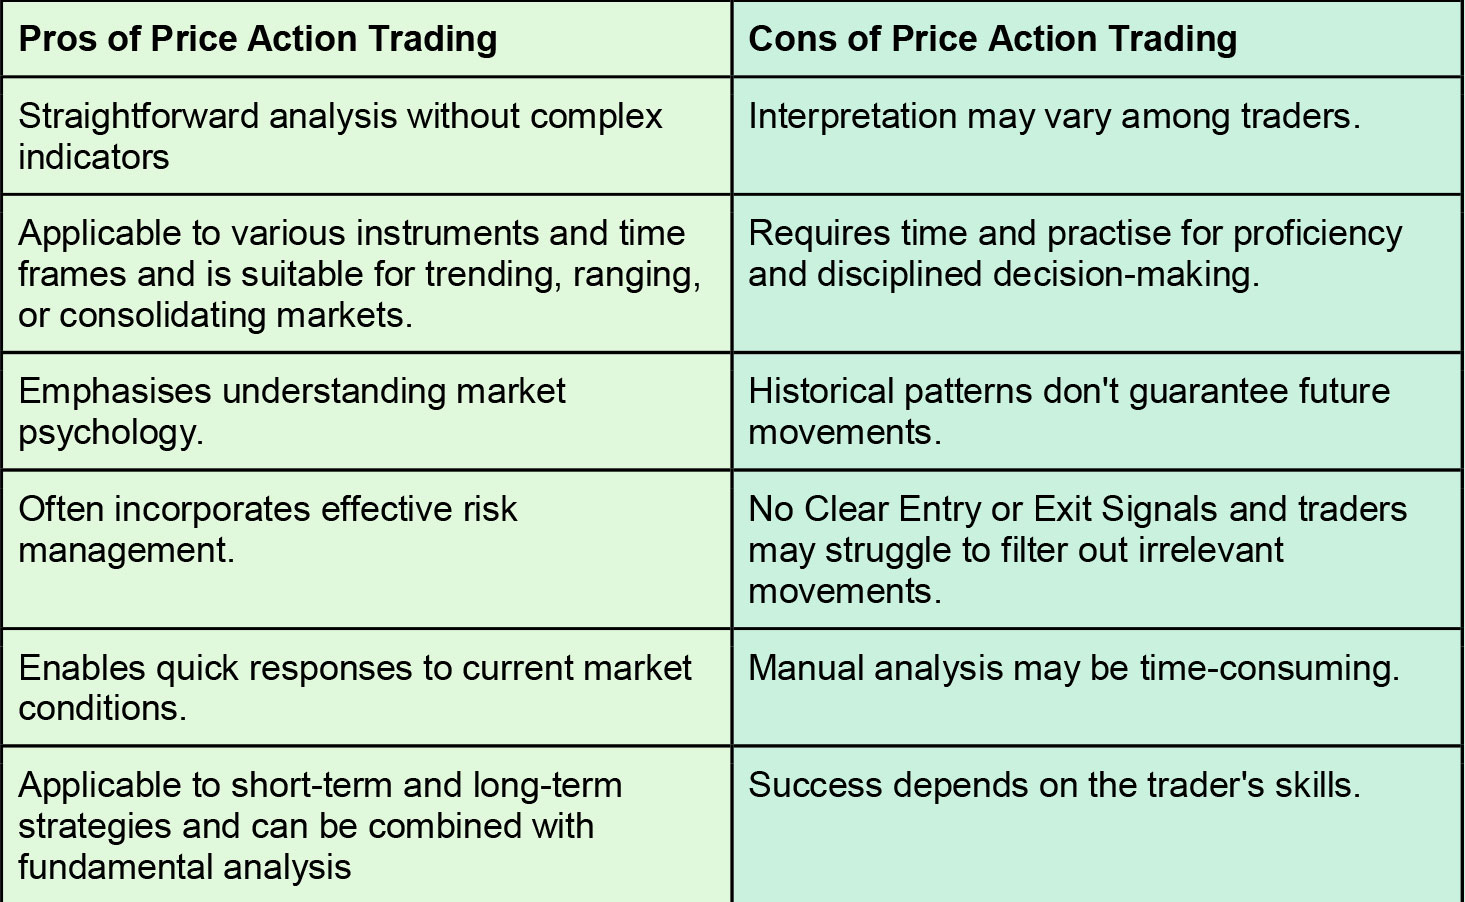 pros and cons of price action trading